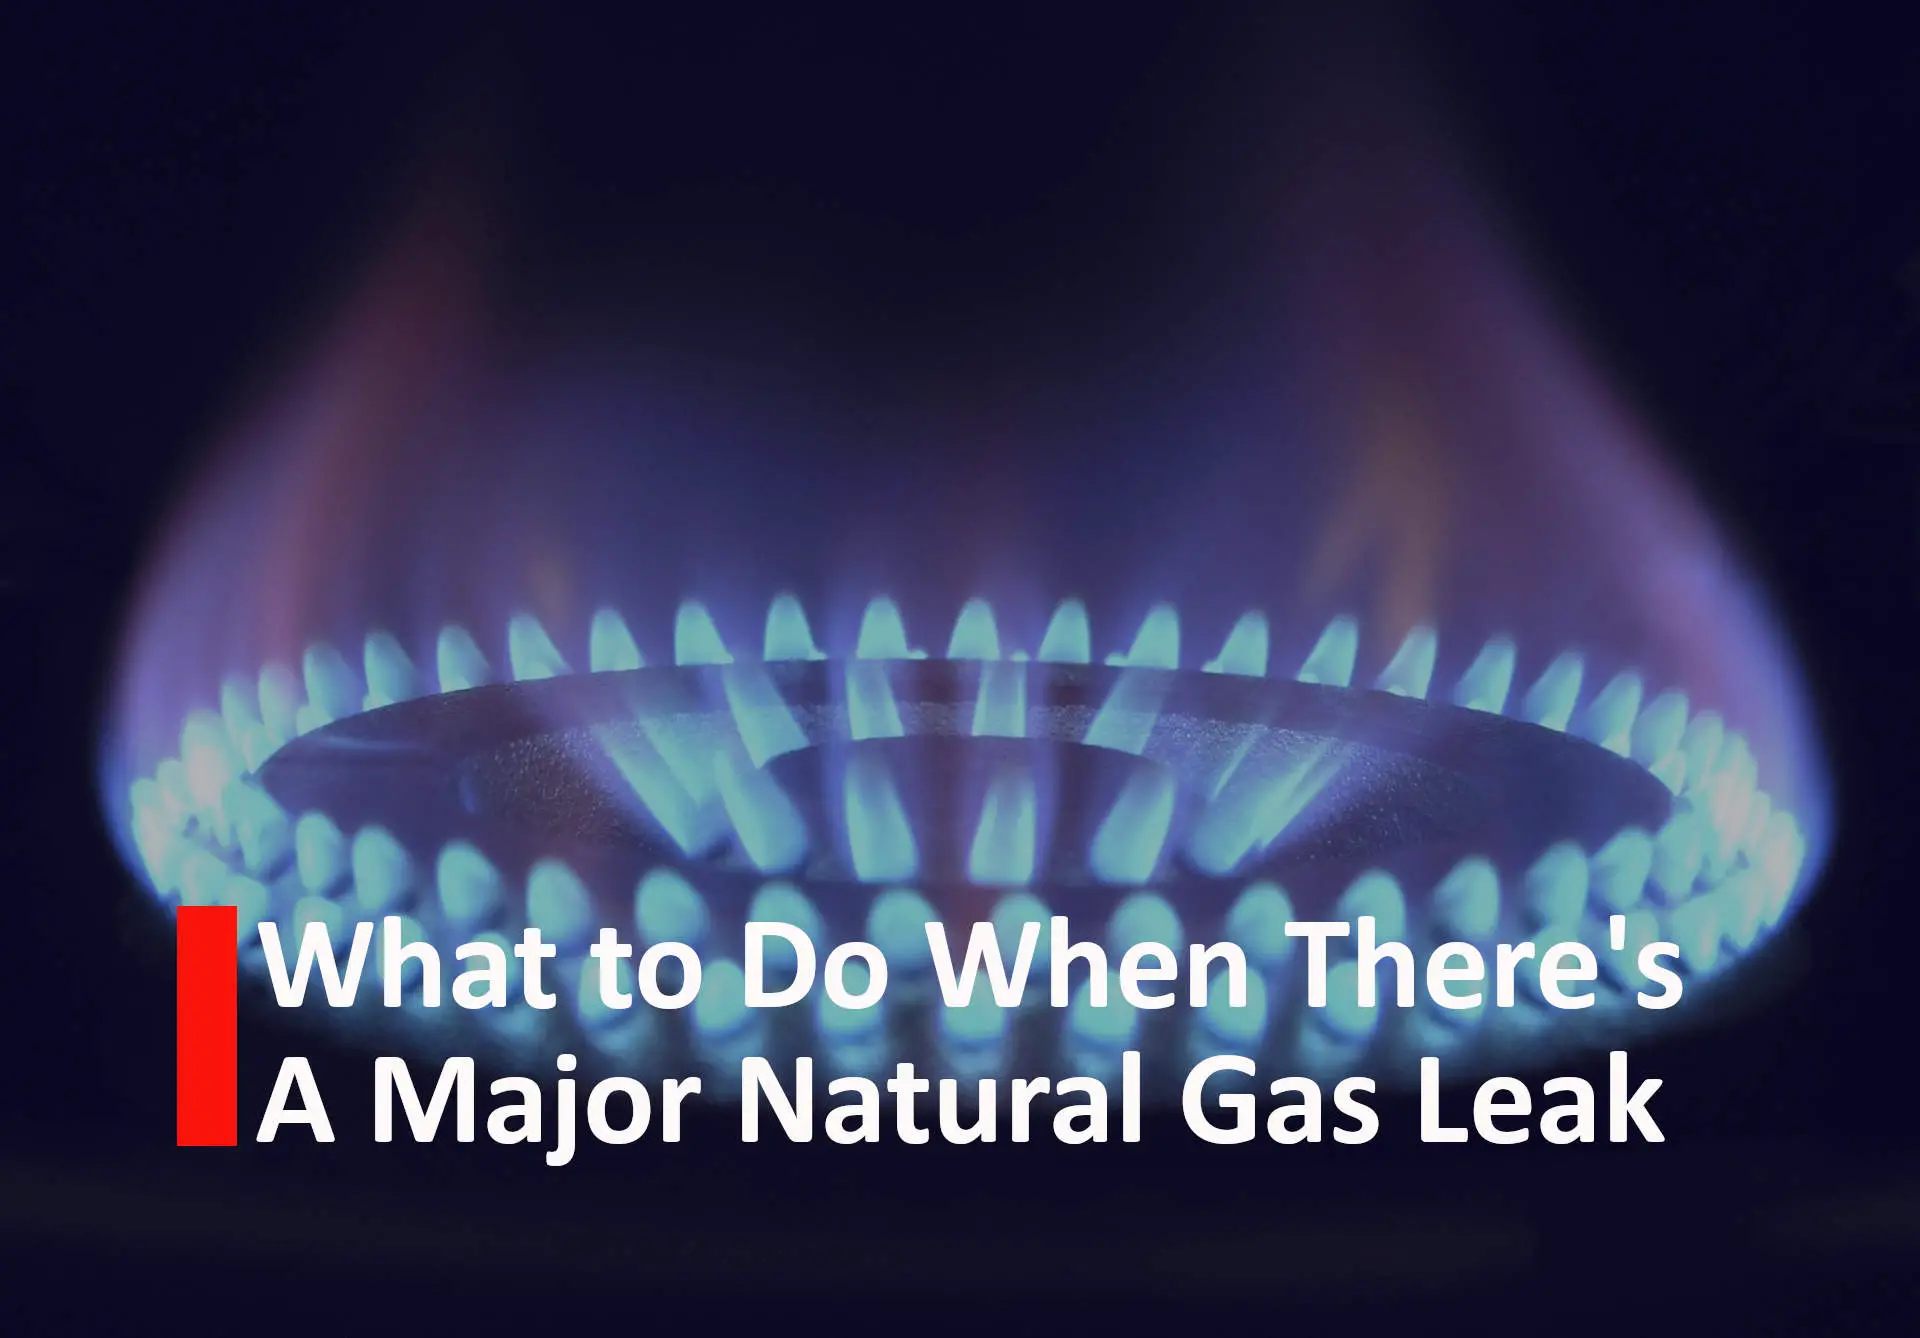 What to do when there's a major natural gas leak